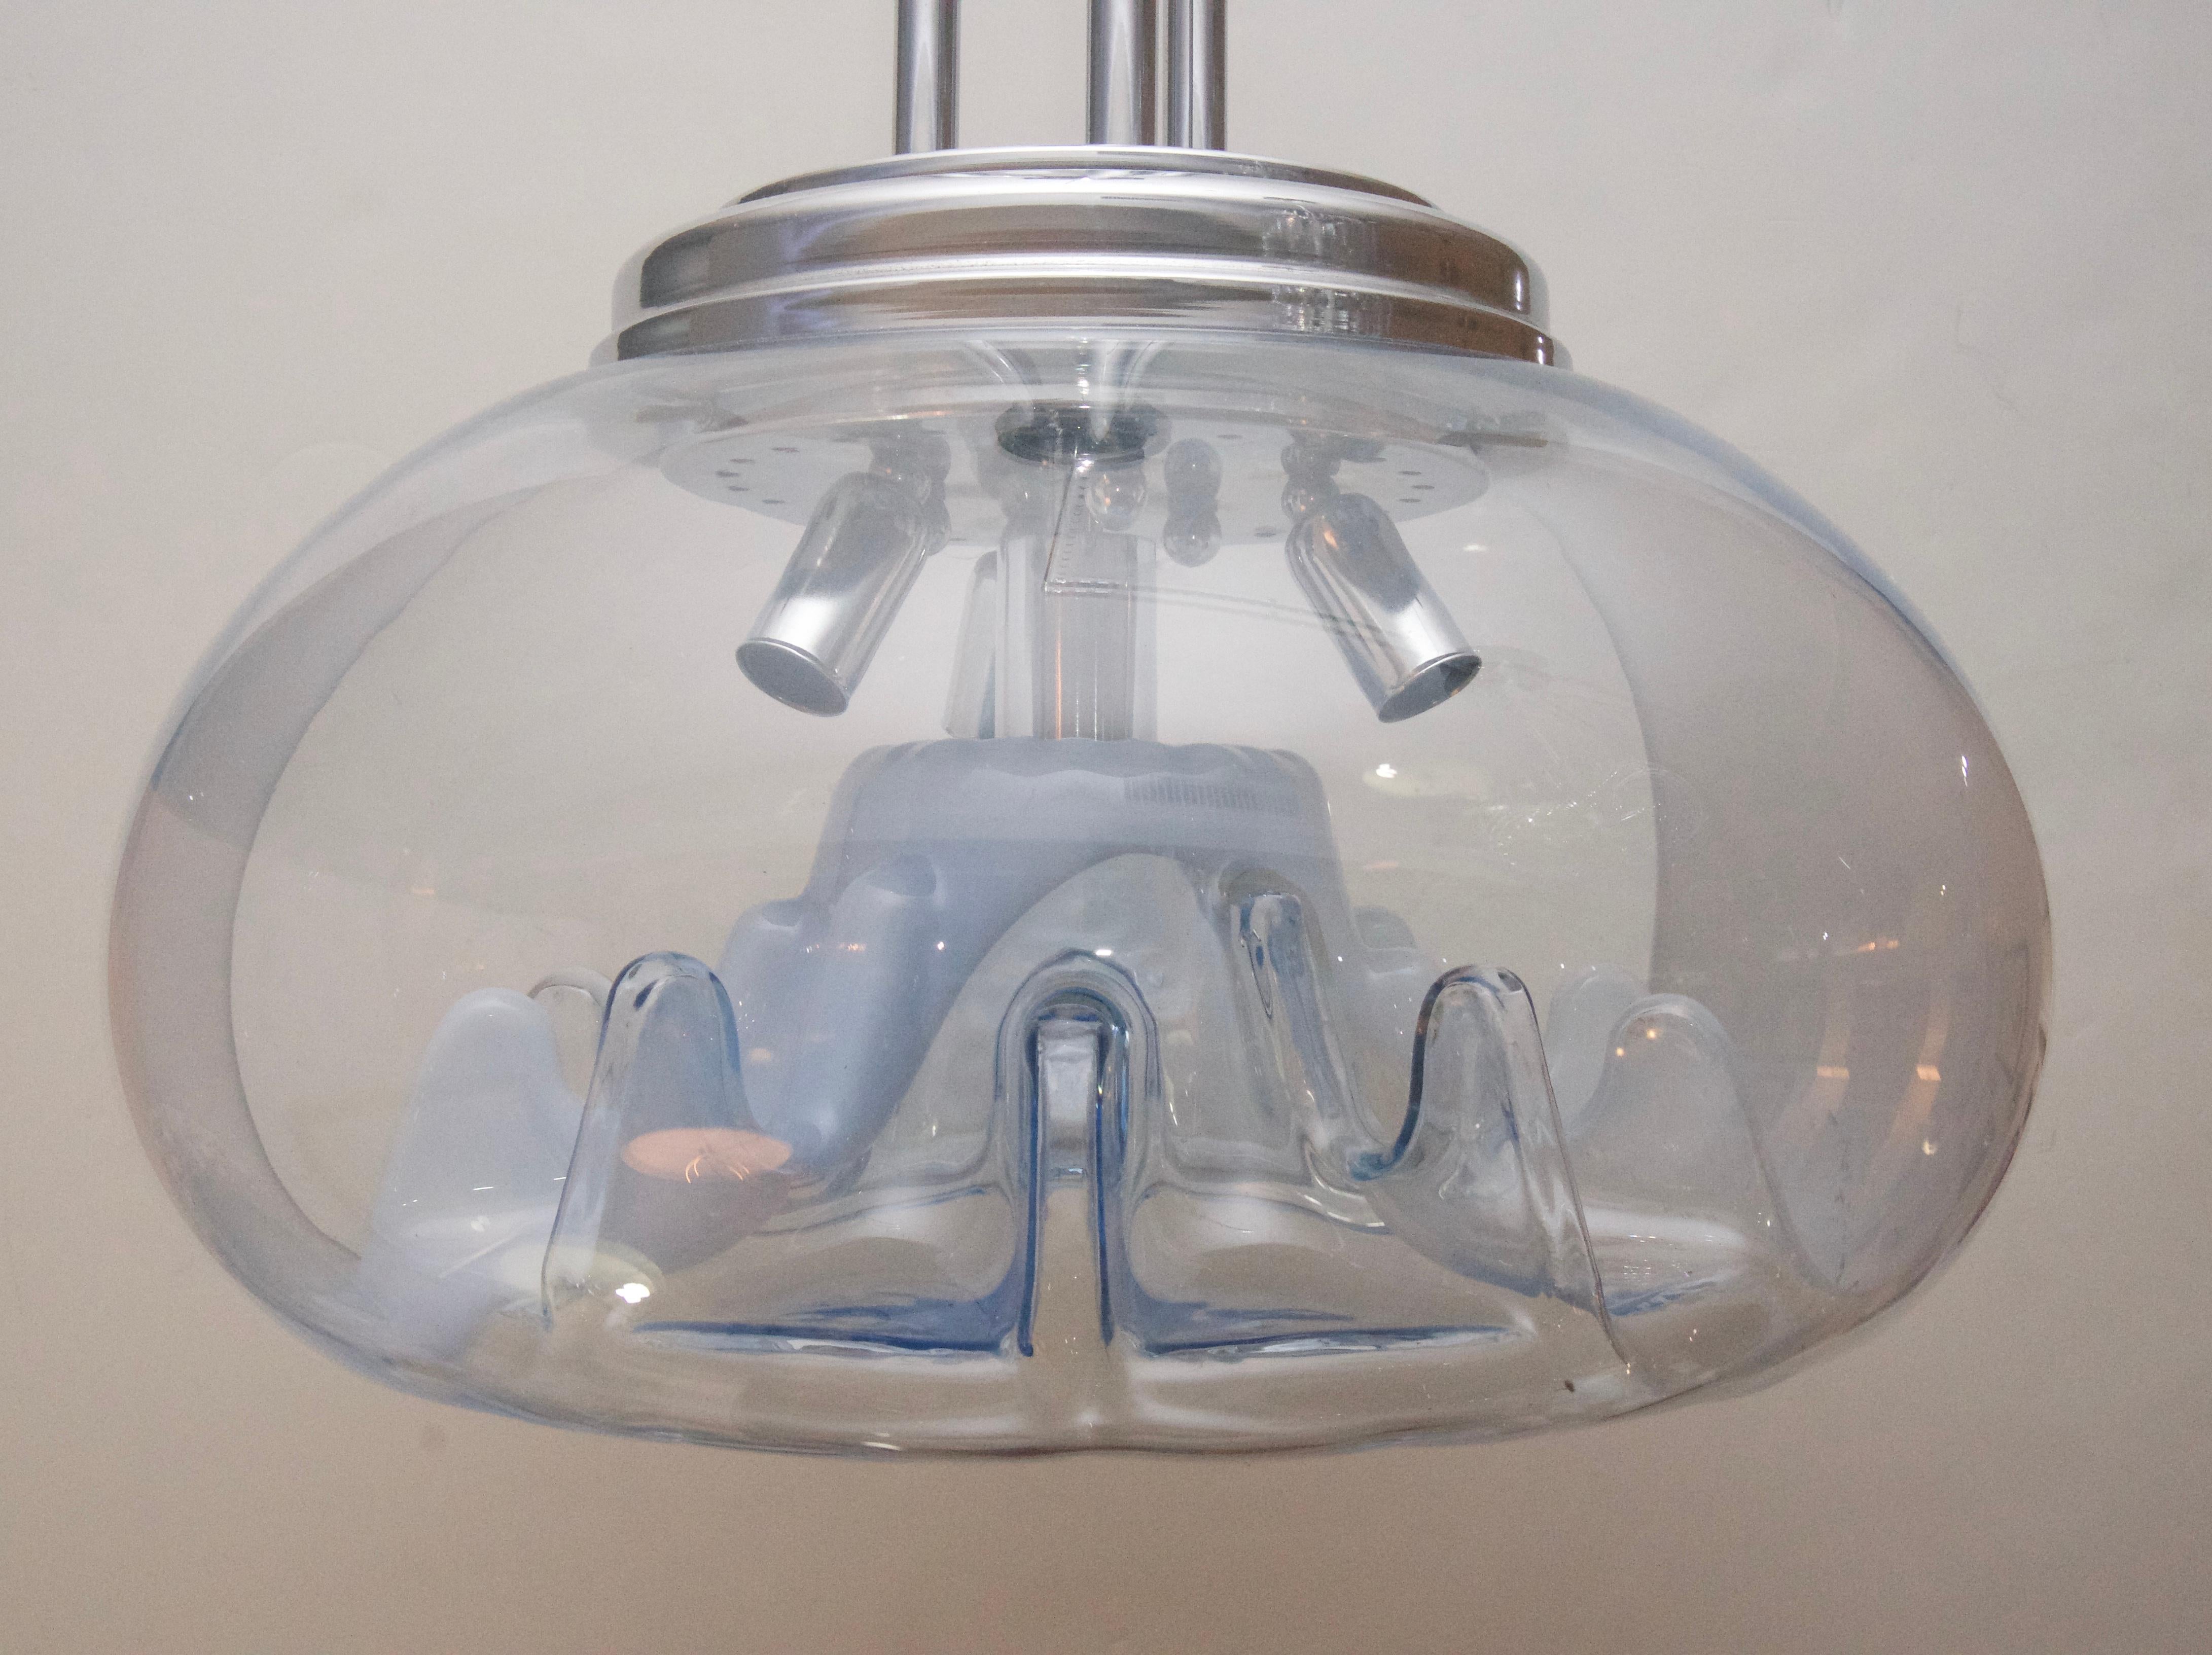 This stylish and chic Mazzega chandelier dates to the 1950s-1960s.

Note: Requires three E14 light bulbs.

